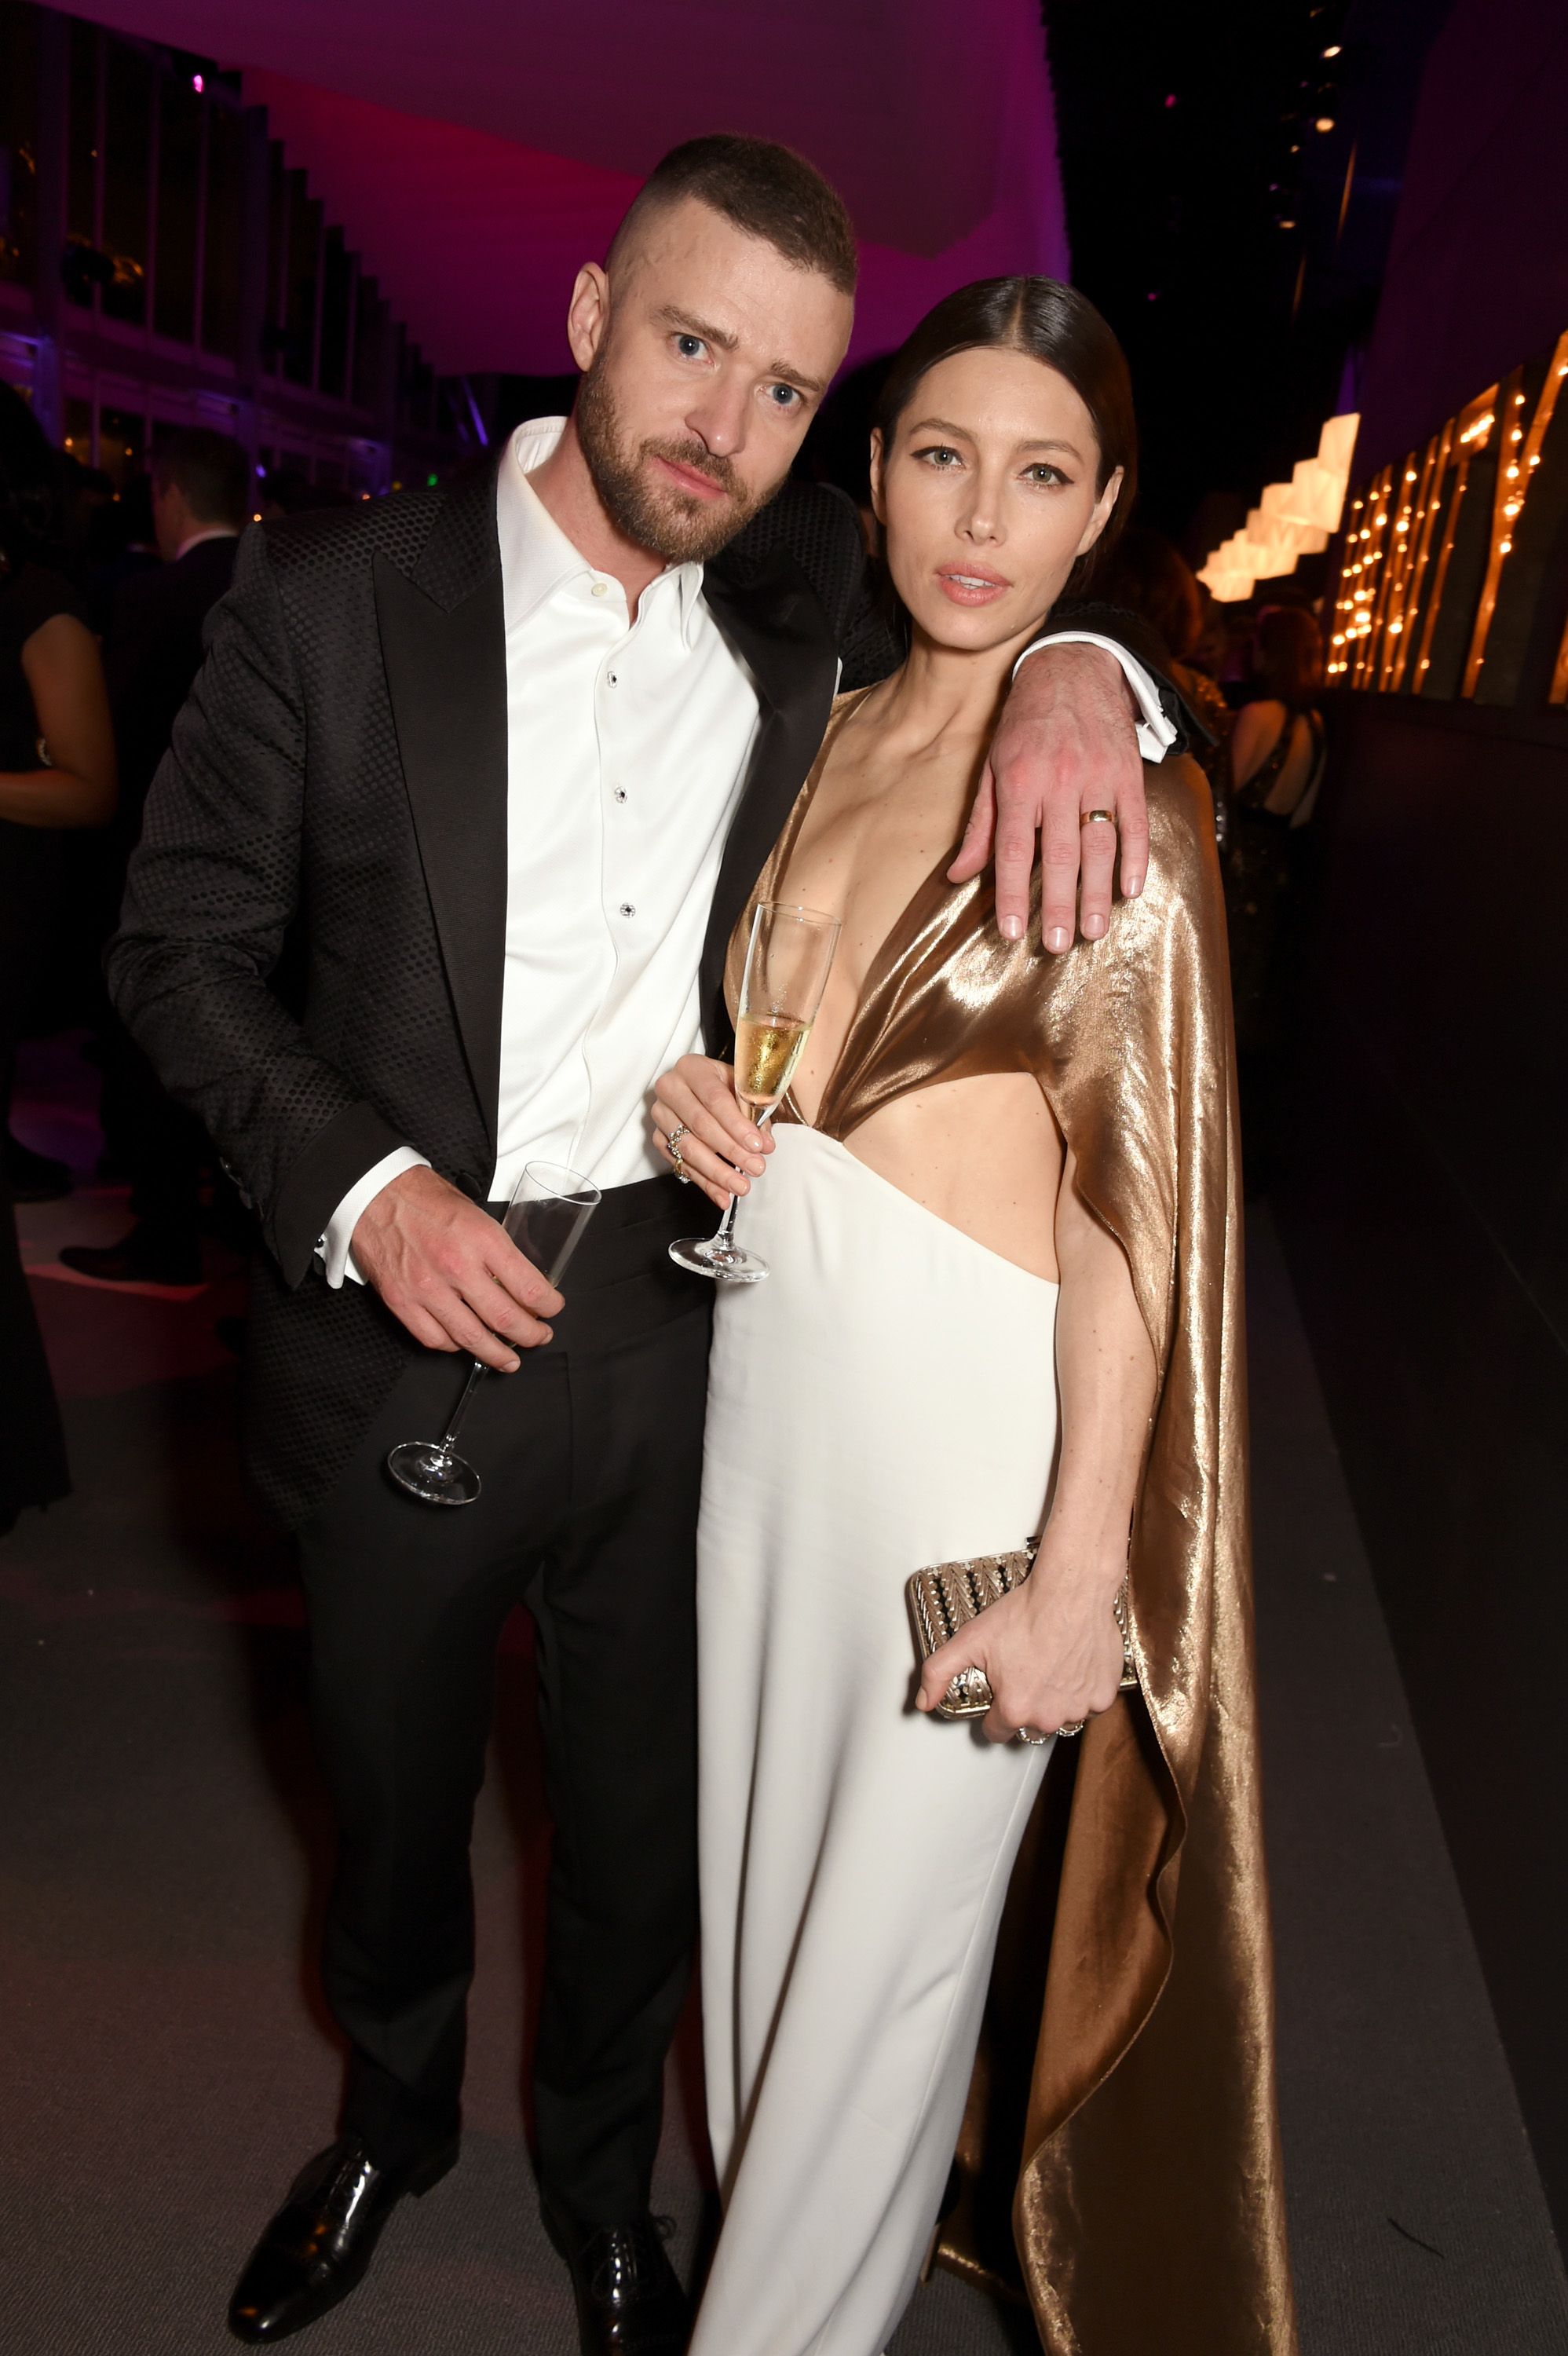 Jessica Biel 'Encouraged' Justin Timberlake to Publicly Apologize to Her  for Alisha Wainwright PDA Pics